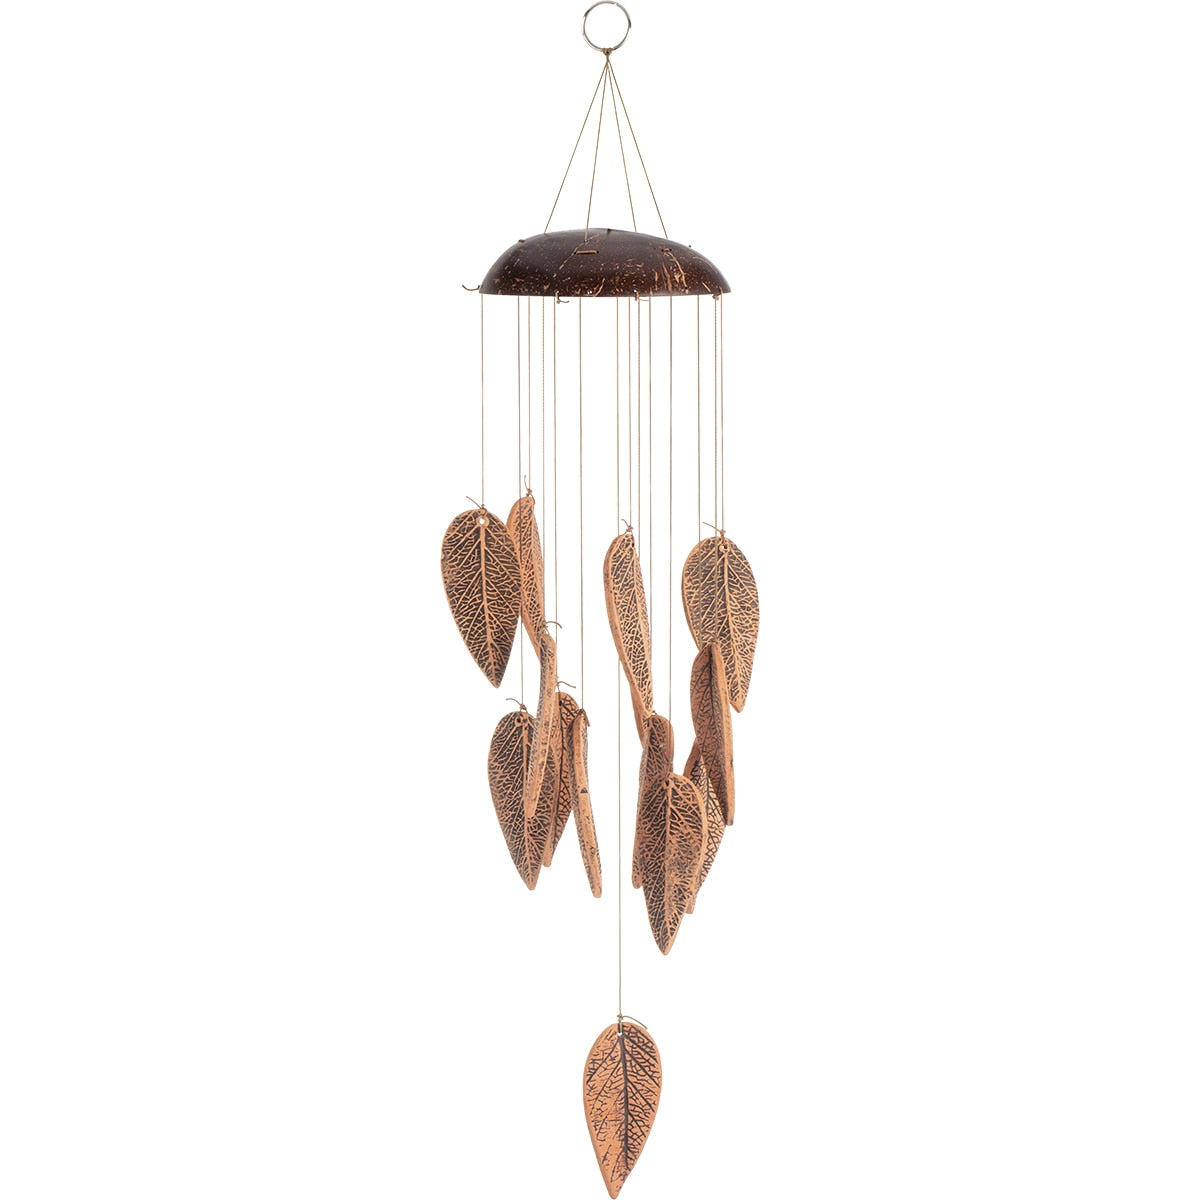 aoin Coconut Shell Wind Chimes Outdoor Home Hanging Decor